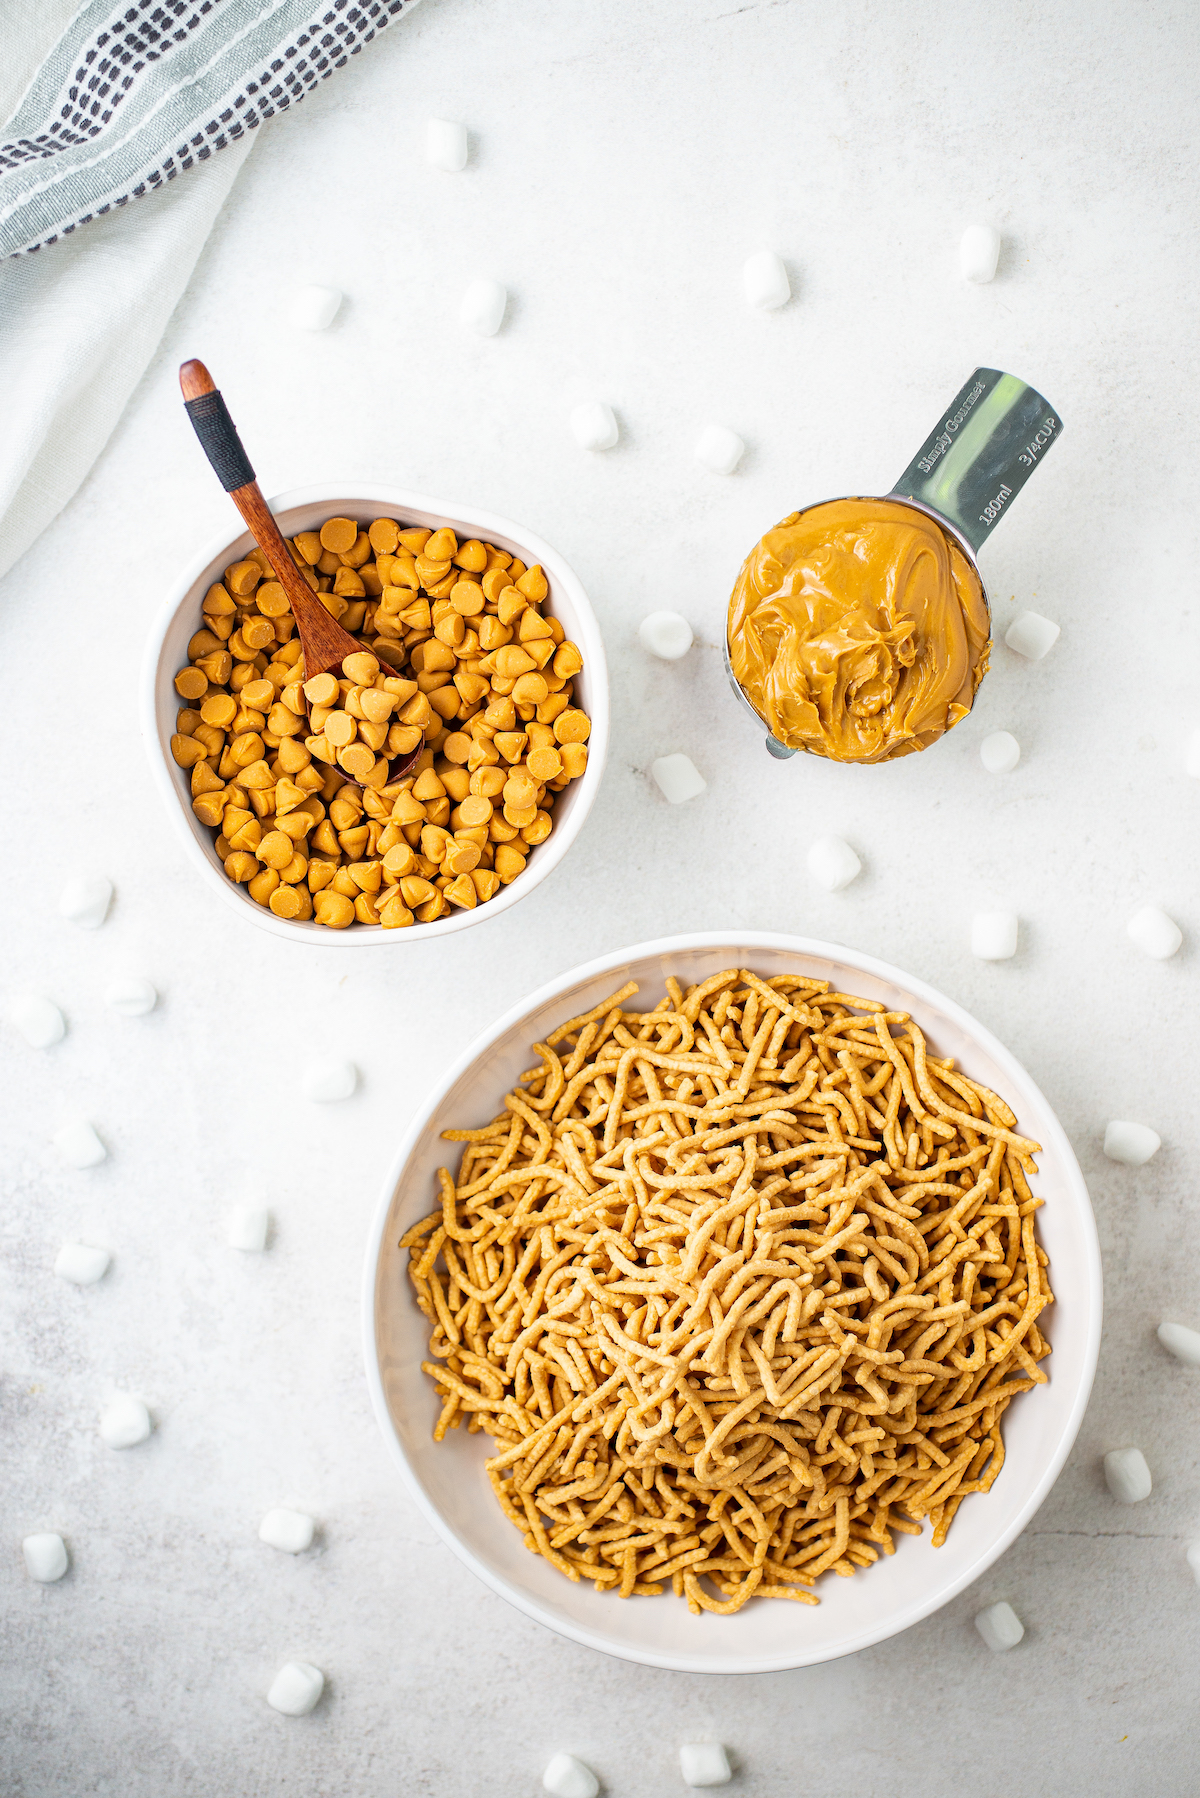 Dishes of butterscotch chips, peanut butter, and crispy chow mein noodles on a cookie sheet lined with wax paper. Mini marshmallows are dotted around the dishes.